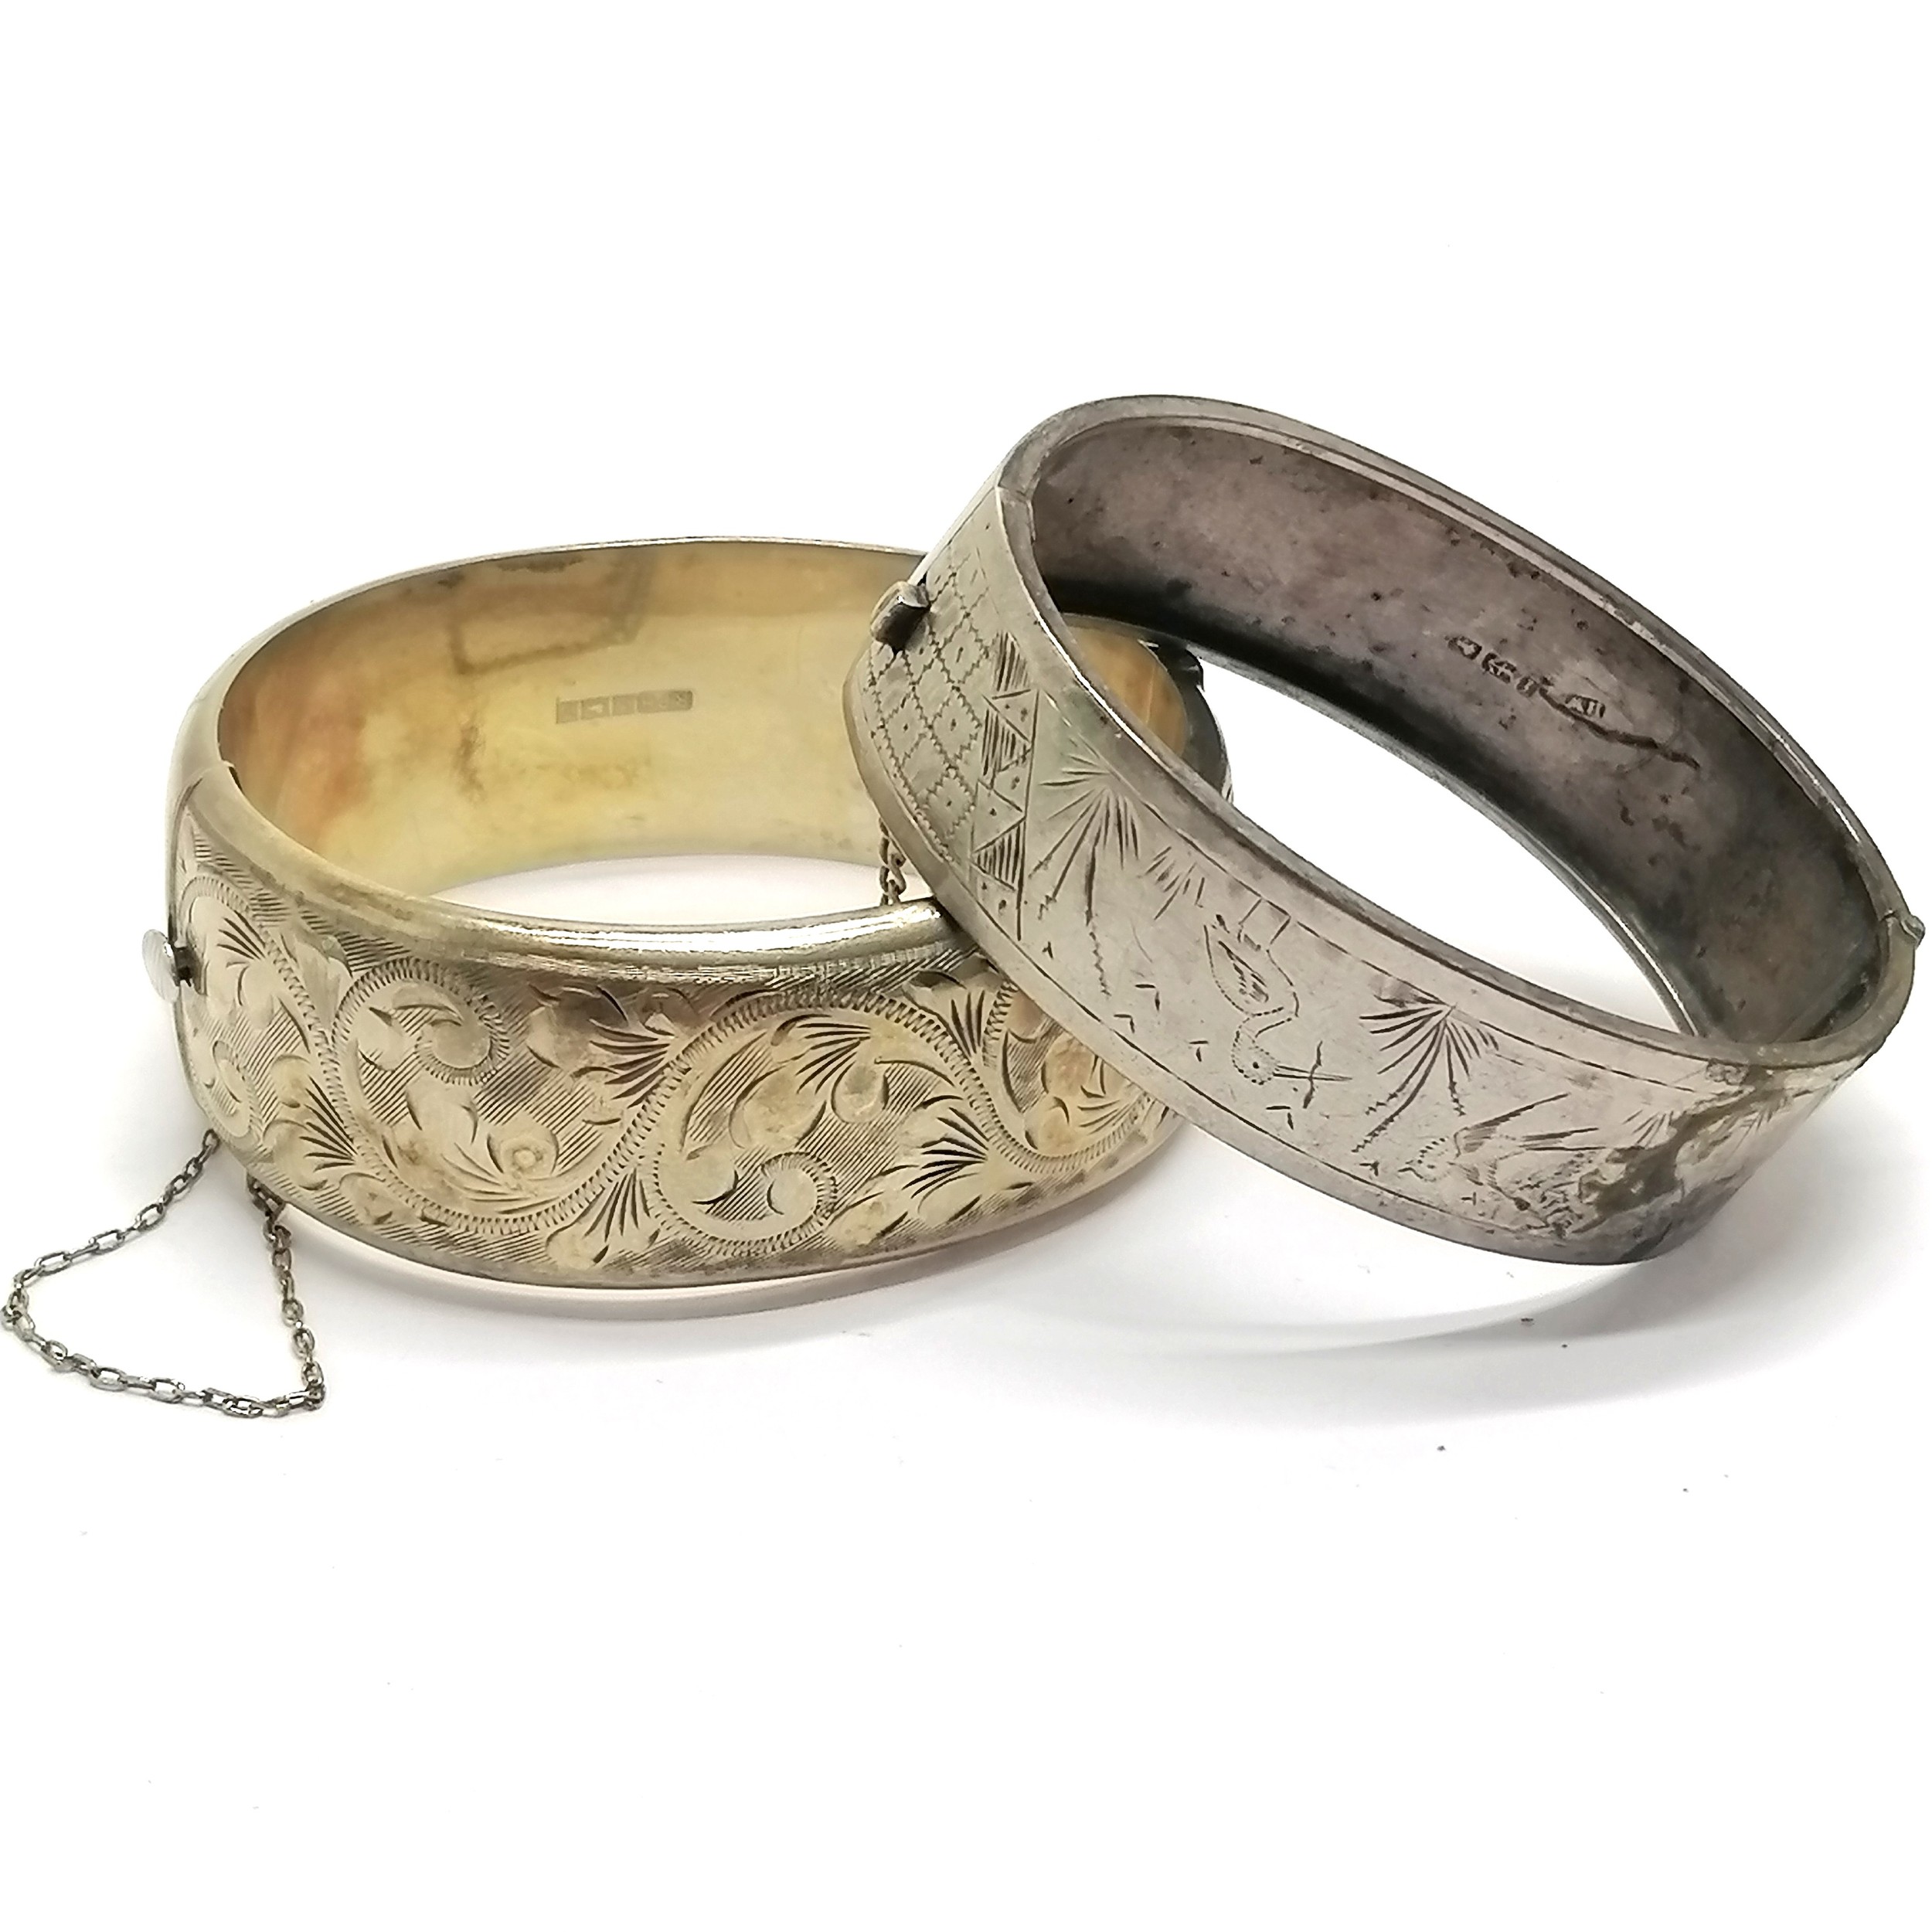 2 x silver bangles - 1 antique with bird detail (a/f), the other silver gilt - total weight (2) 59g